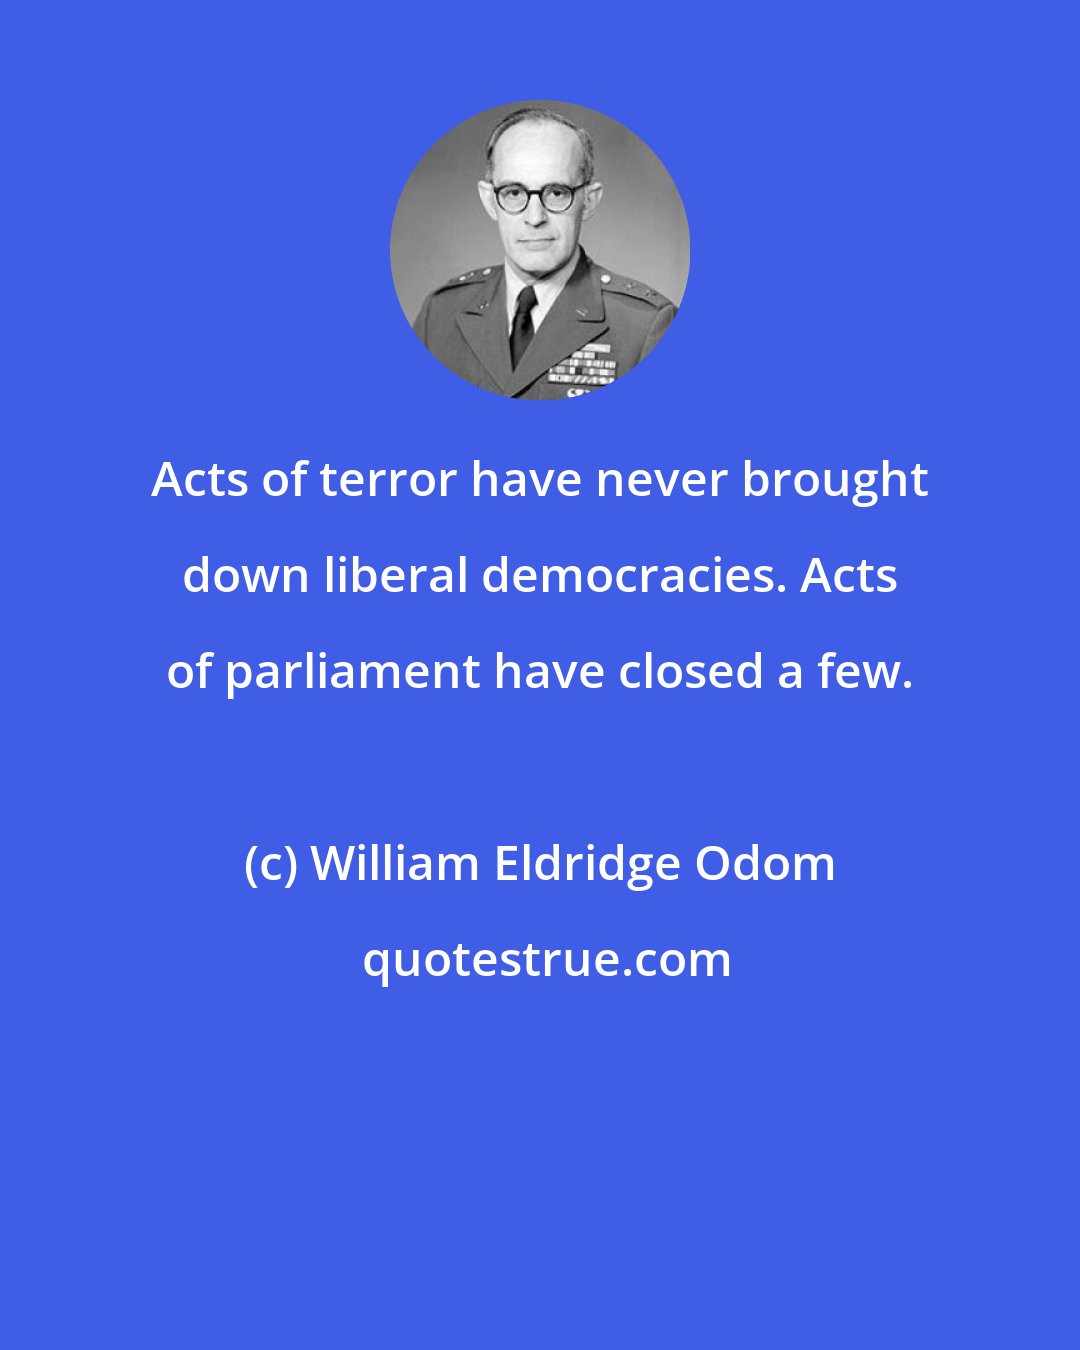 William Eldridge Odom: Acts of terror have never brought down liberal democracies. Acts of parliament have closed a few.